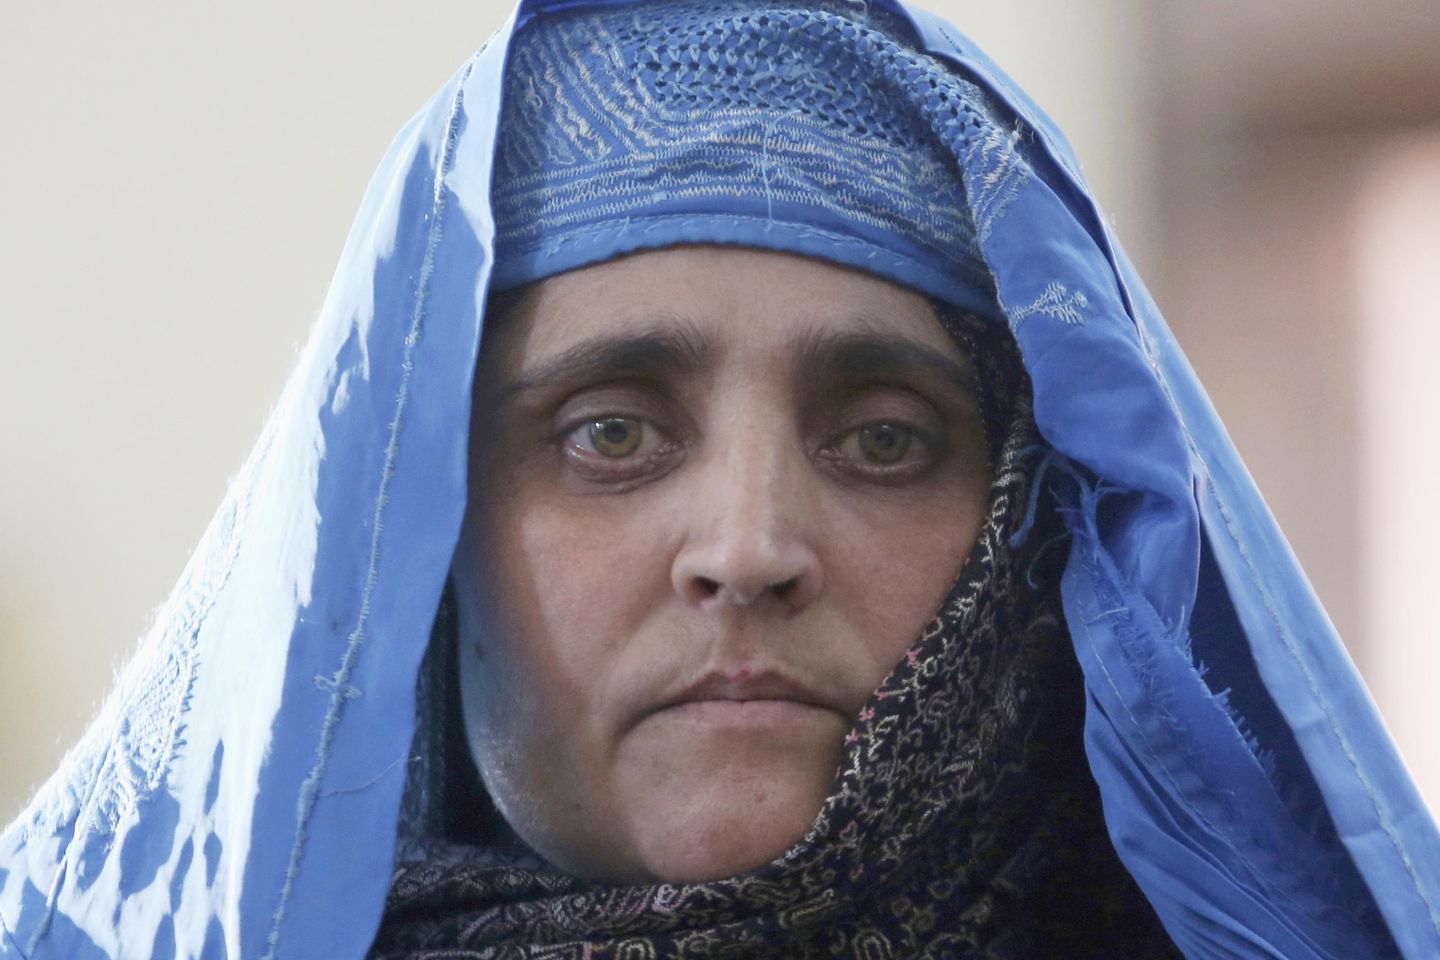 Afghan Girl with green eyes from famous National Geographic cover portrait is evacuated to Italy